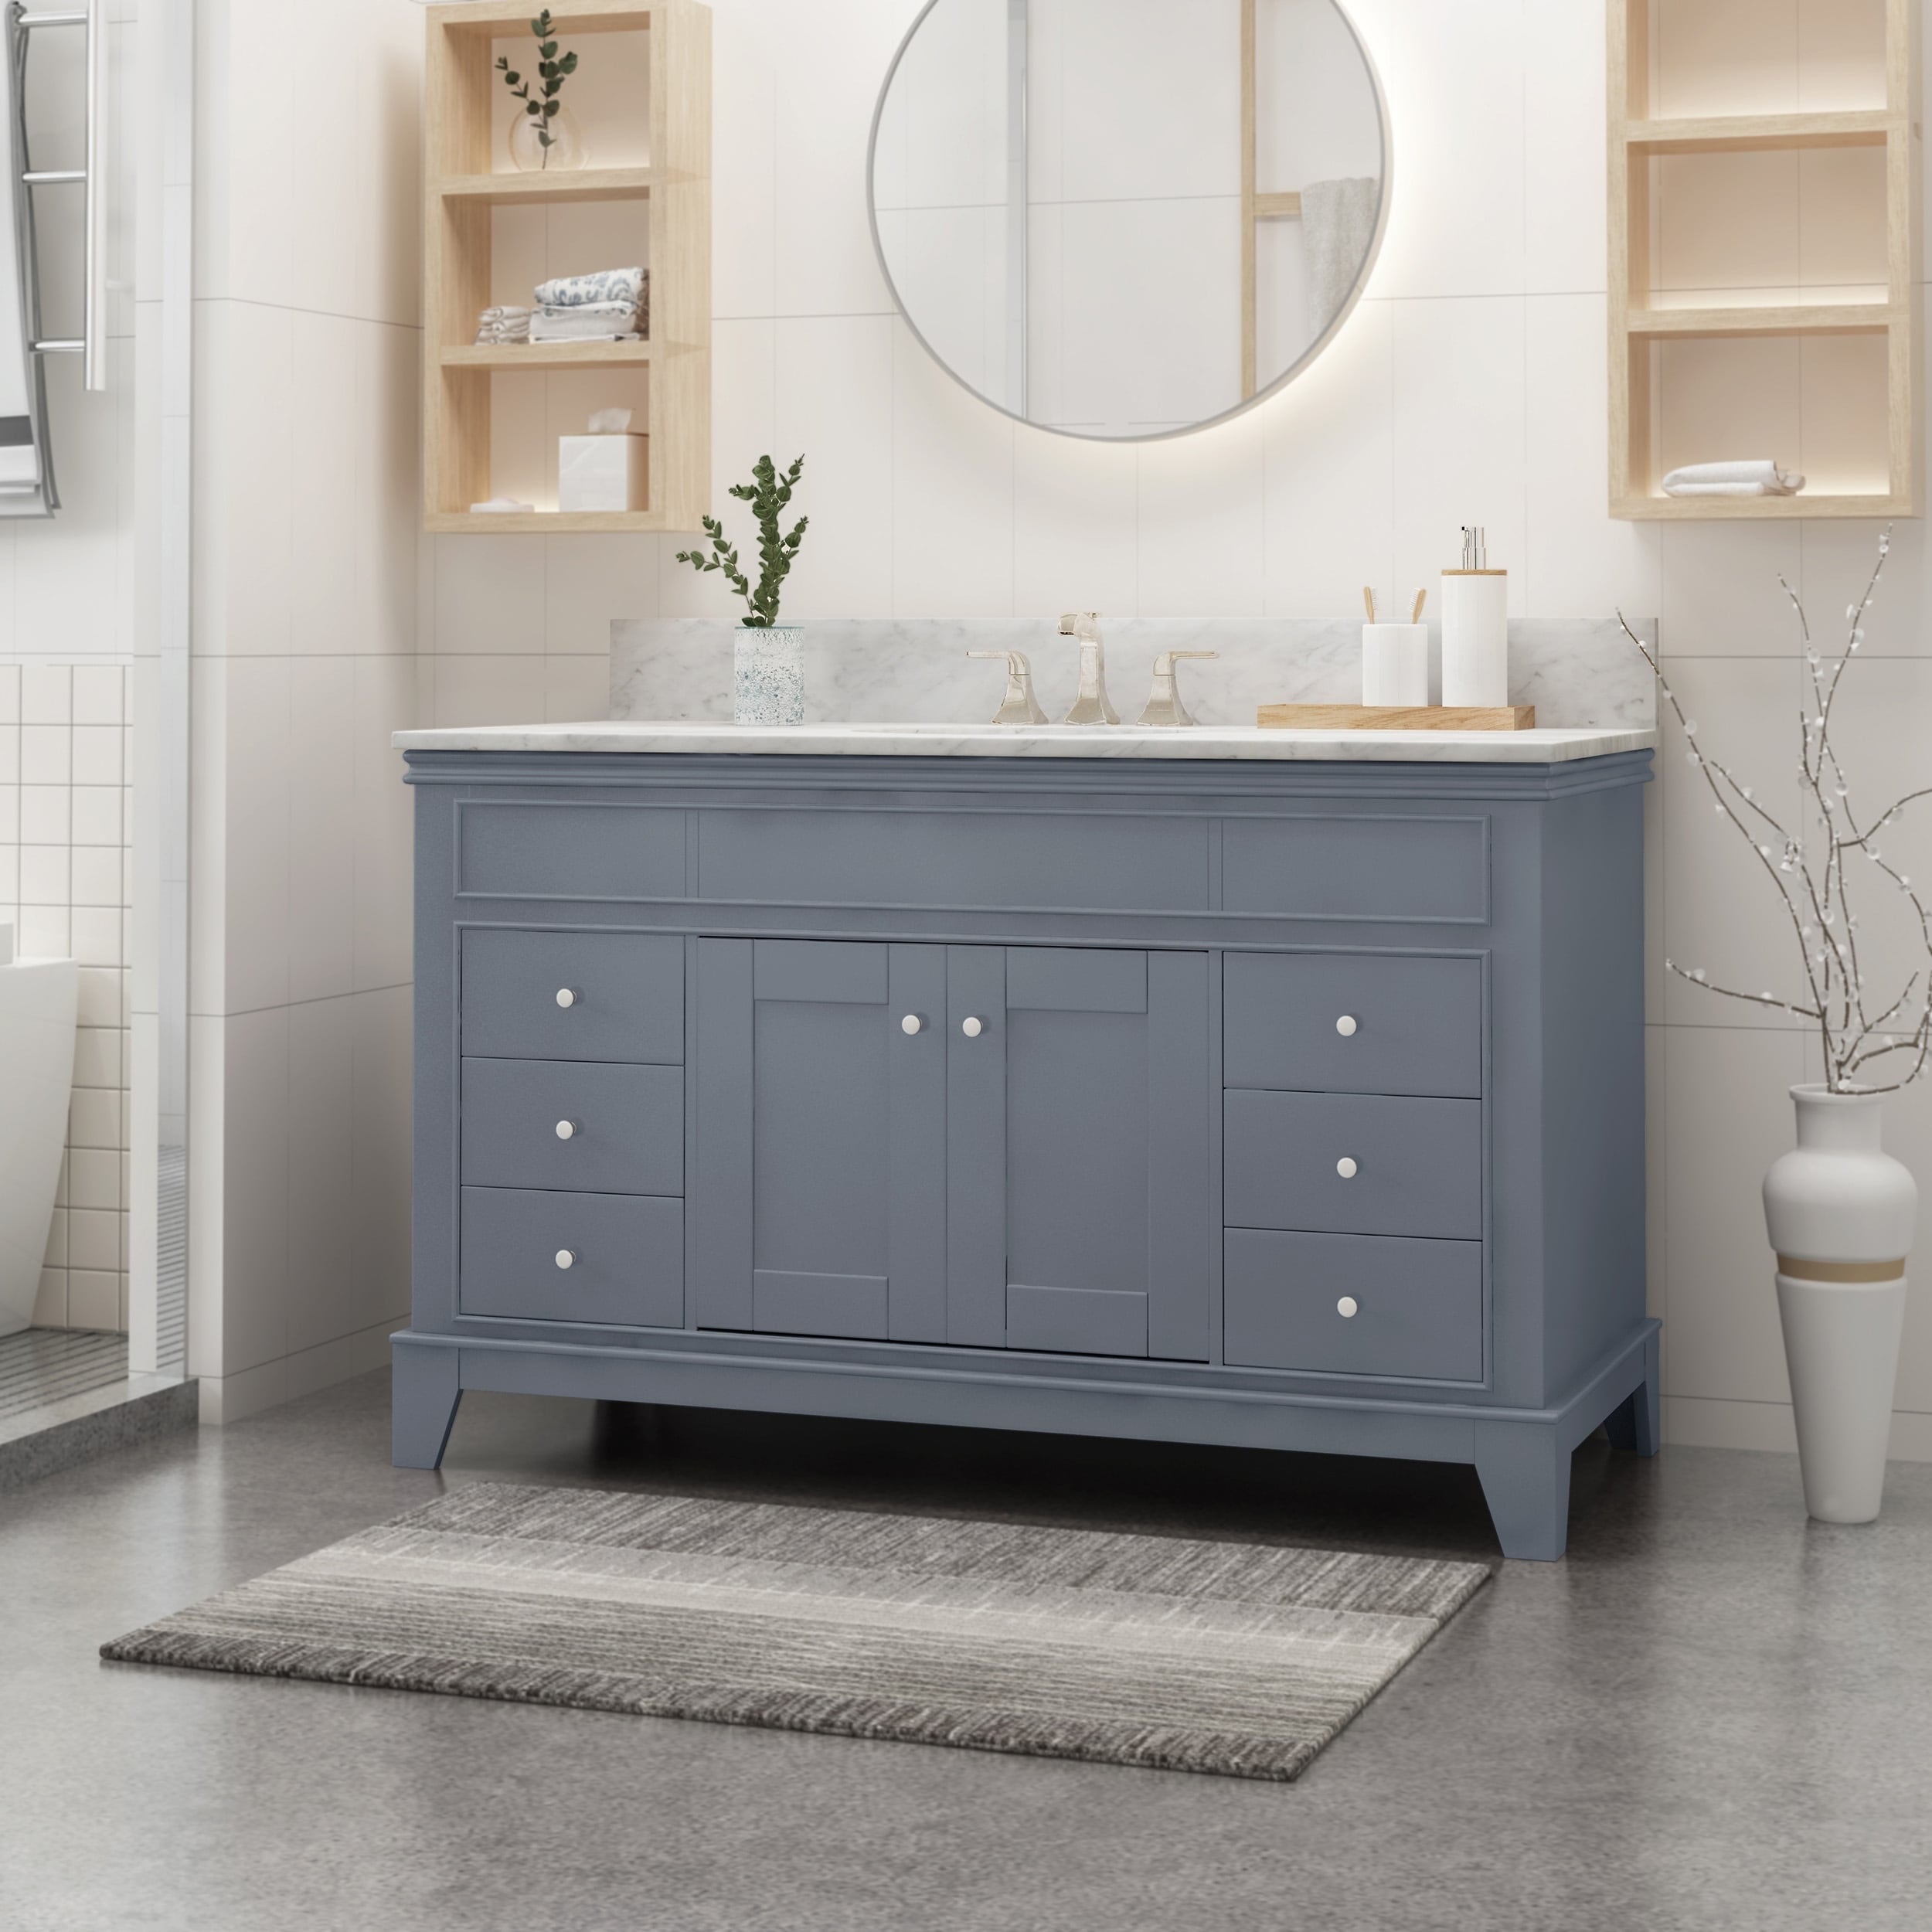 Feldspar 48 Wood Bathroom Vanity Counter Top Not Included By Christopher Knight Home Sale 84374 114704